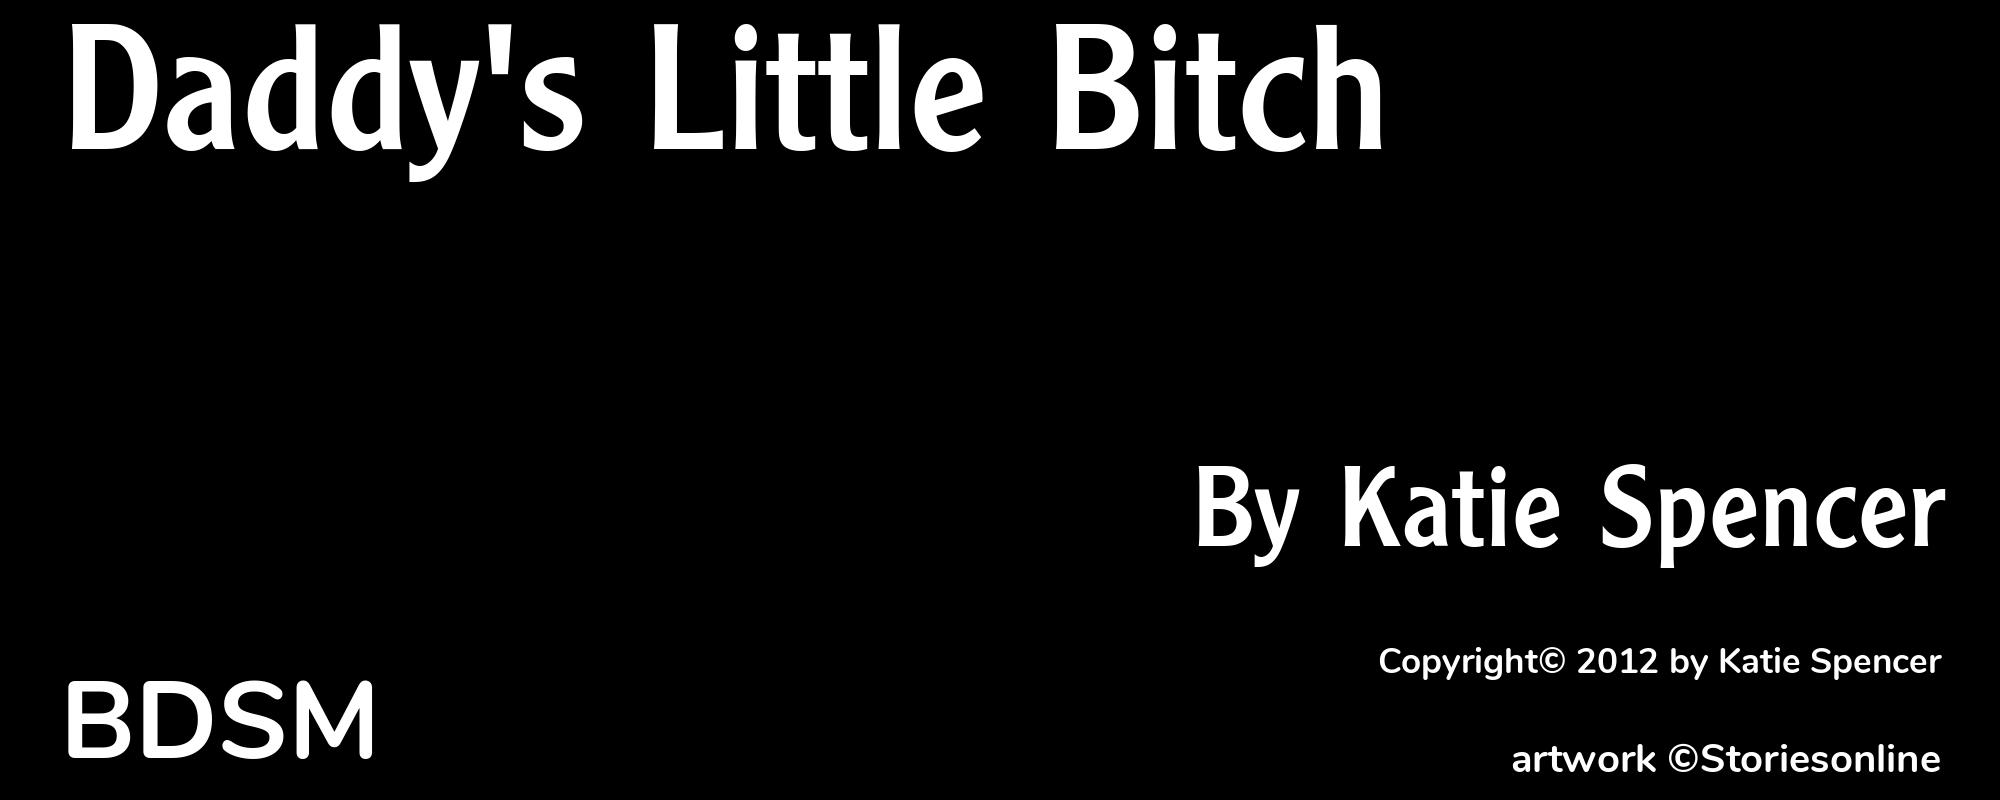 Daddy's Little Bitch - Cover